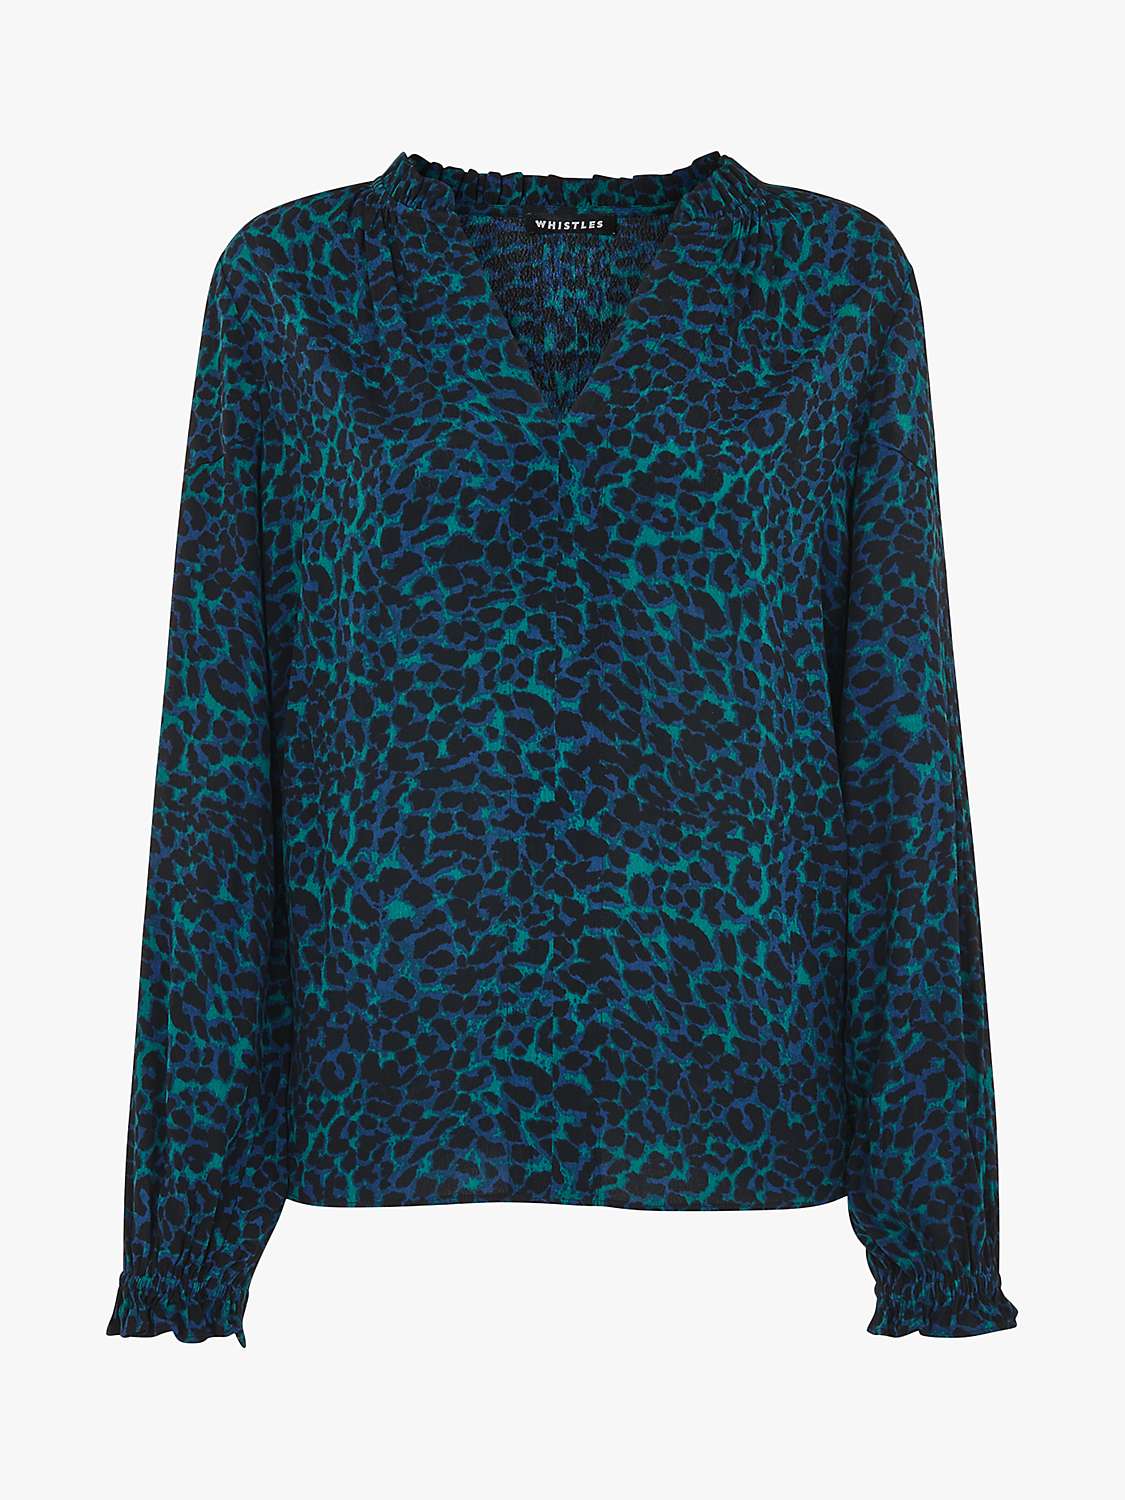 Buy Whistles Forest Leopard Blouse, Teal/Multi Online at johnlewis.com